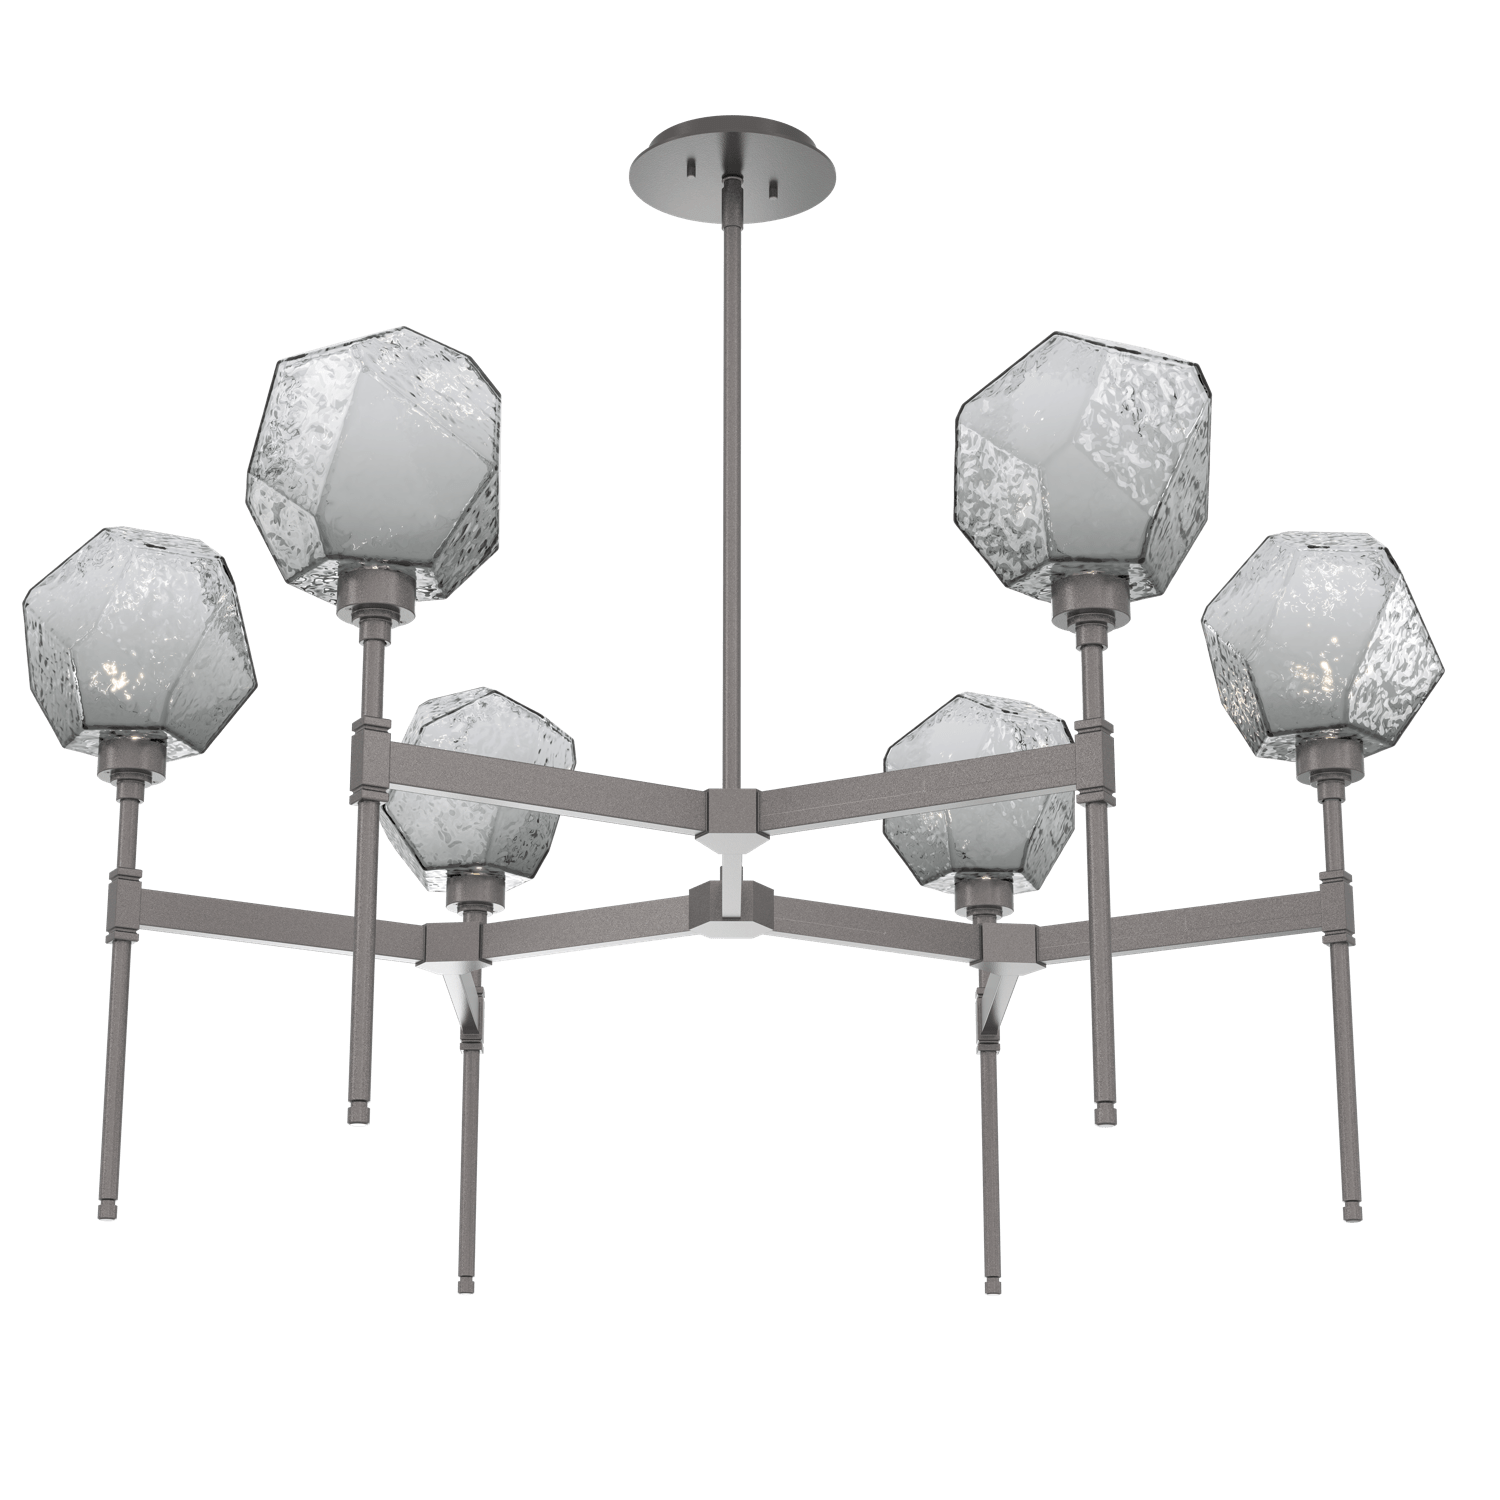 CHB0039-39-GP-S-Hammerton-Studio-Gem-round-belvedere-chandelier-with-graphite-finish-and-smoke-blown-glass-shades-and-LED-lamping